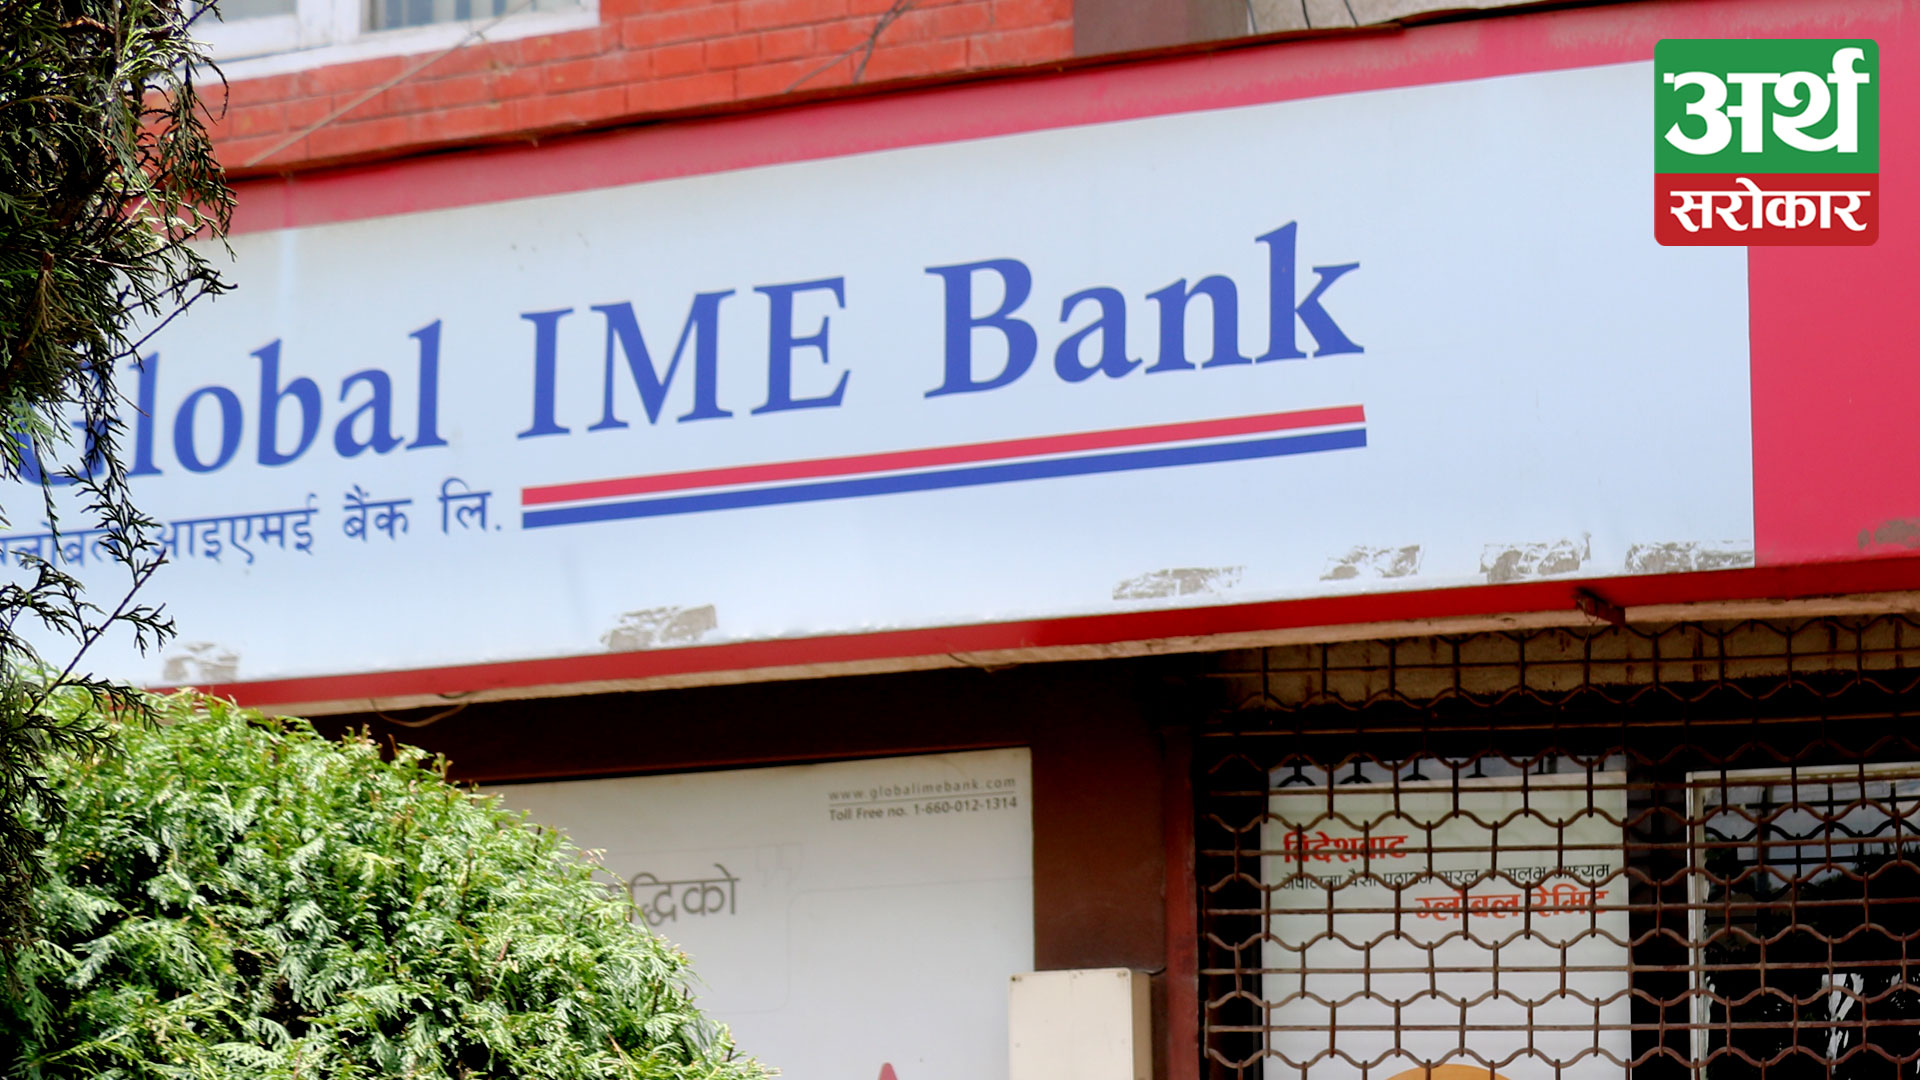 Global IME Bank announced to distribute 9% dividends